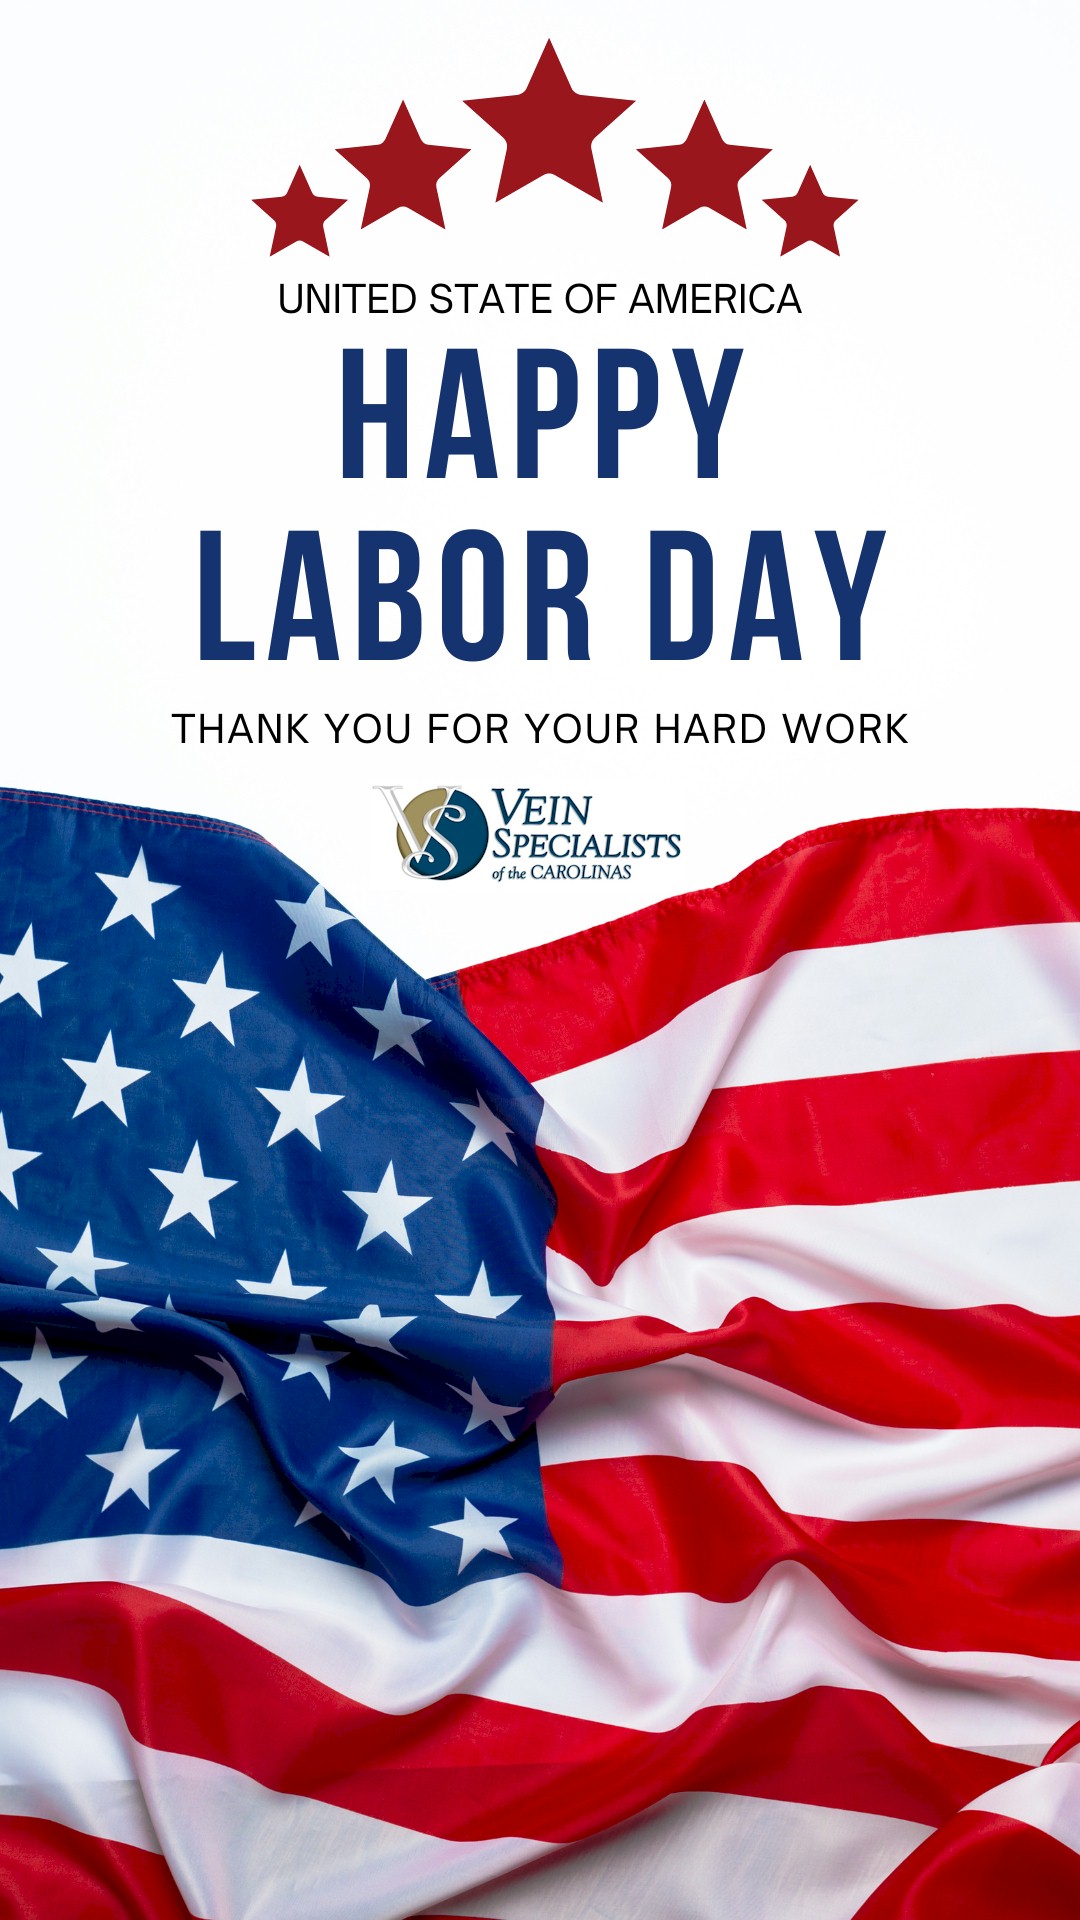 Happy Labor Day Weekend From VSC!